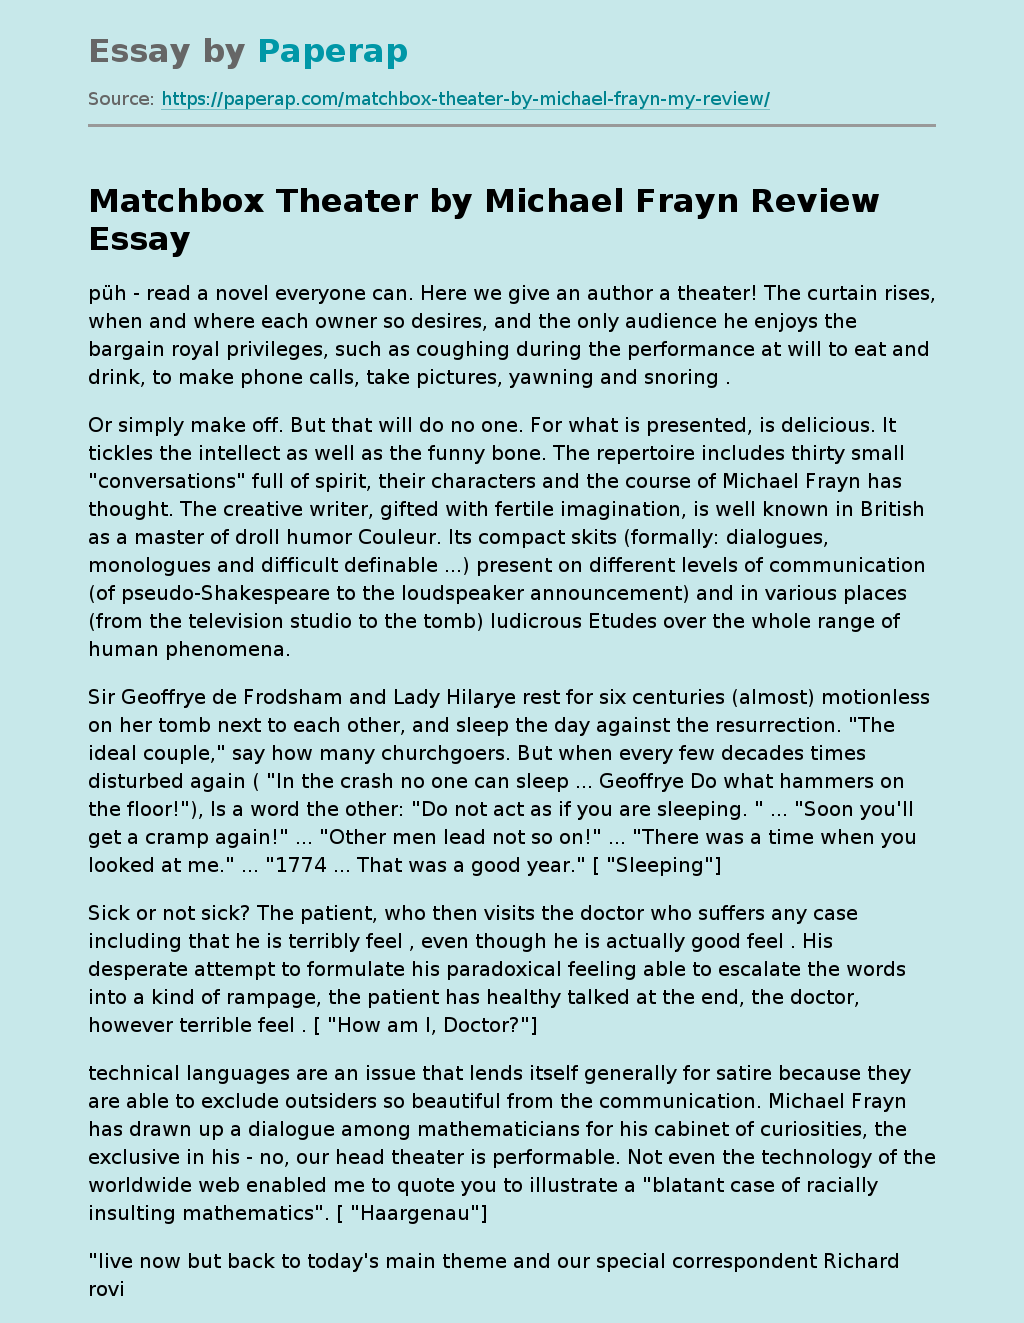 Matchbox Theater by Michael Frayn Review